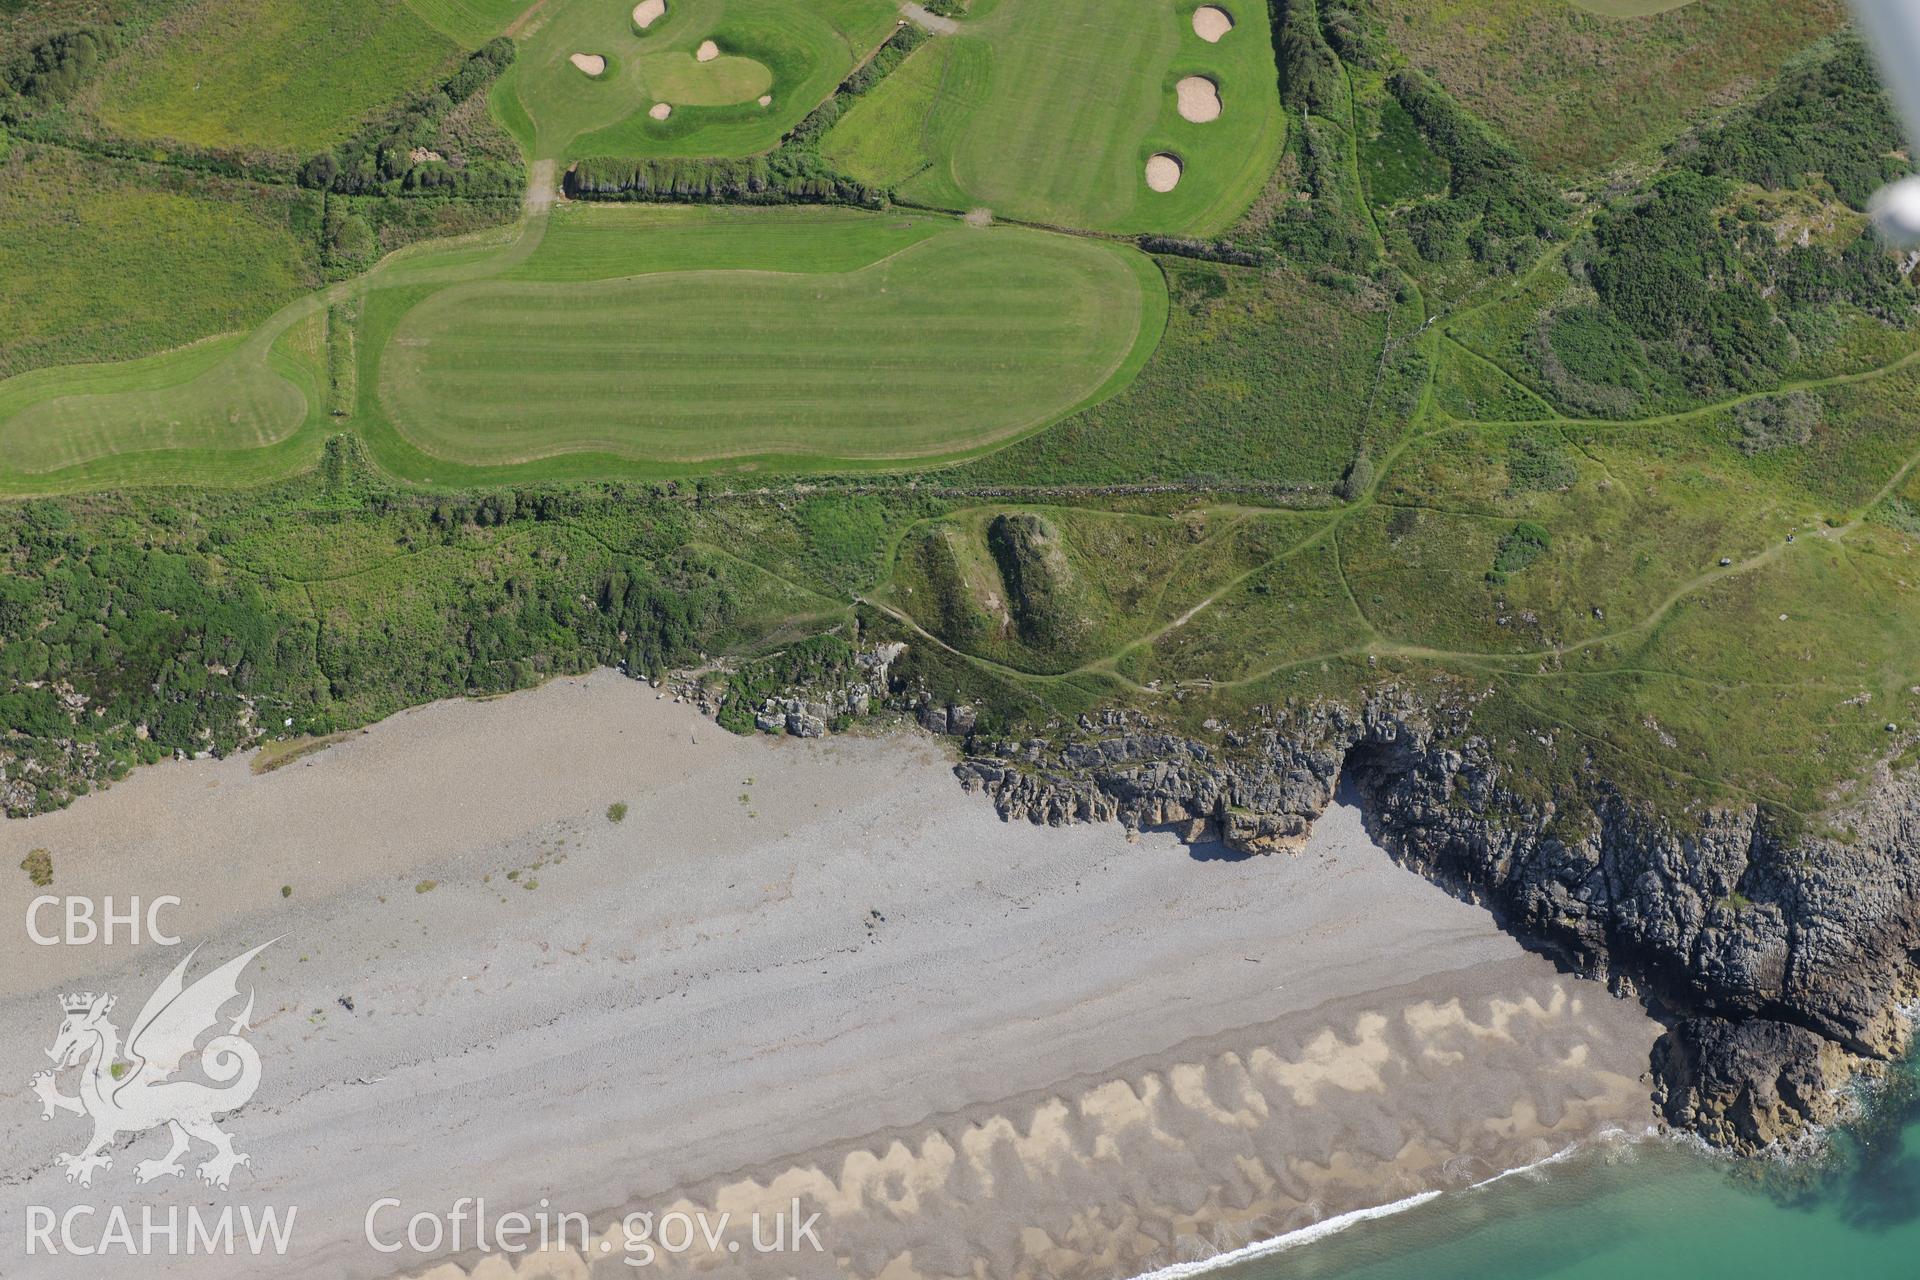 Flint find spot on the cliffs and a disused rifle range on Pen-ychain beach. Oblique aerial photograph taken during the Royal Commission's programme of archaeological aerial reconnaissance by Toby Driver on 23rd June 2015.